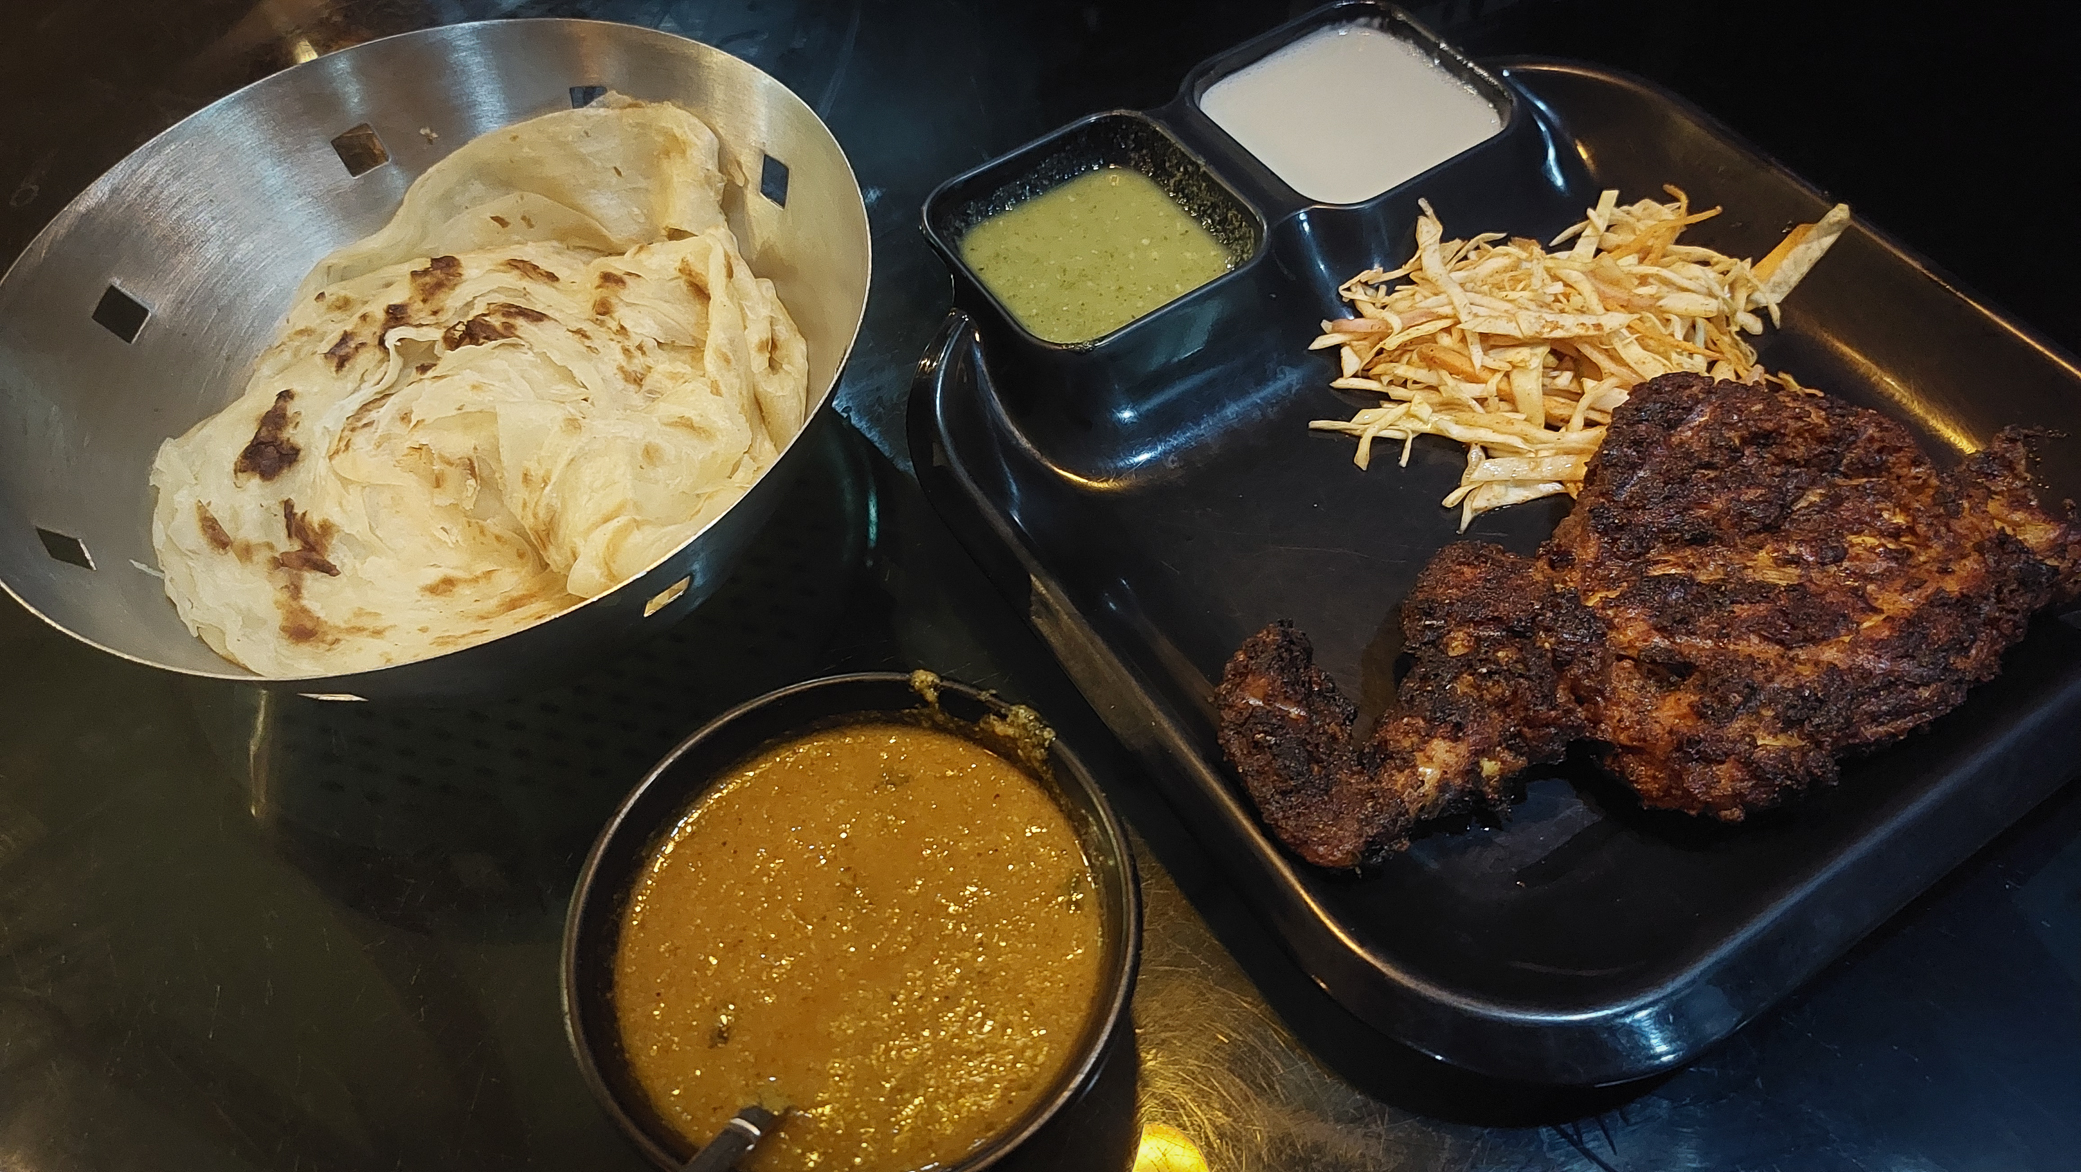 <span  class="uc_style_uc_tiles_grid_image_elementor_uc_items_attribute_title" style="color:#ffffff;">Also BBQ chicken is a very popular dish in india (also sooo goood)</span>